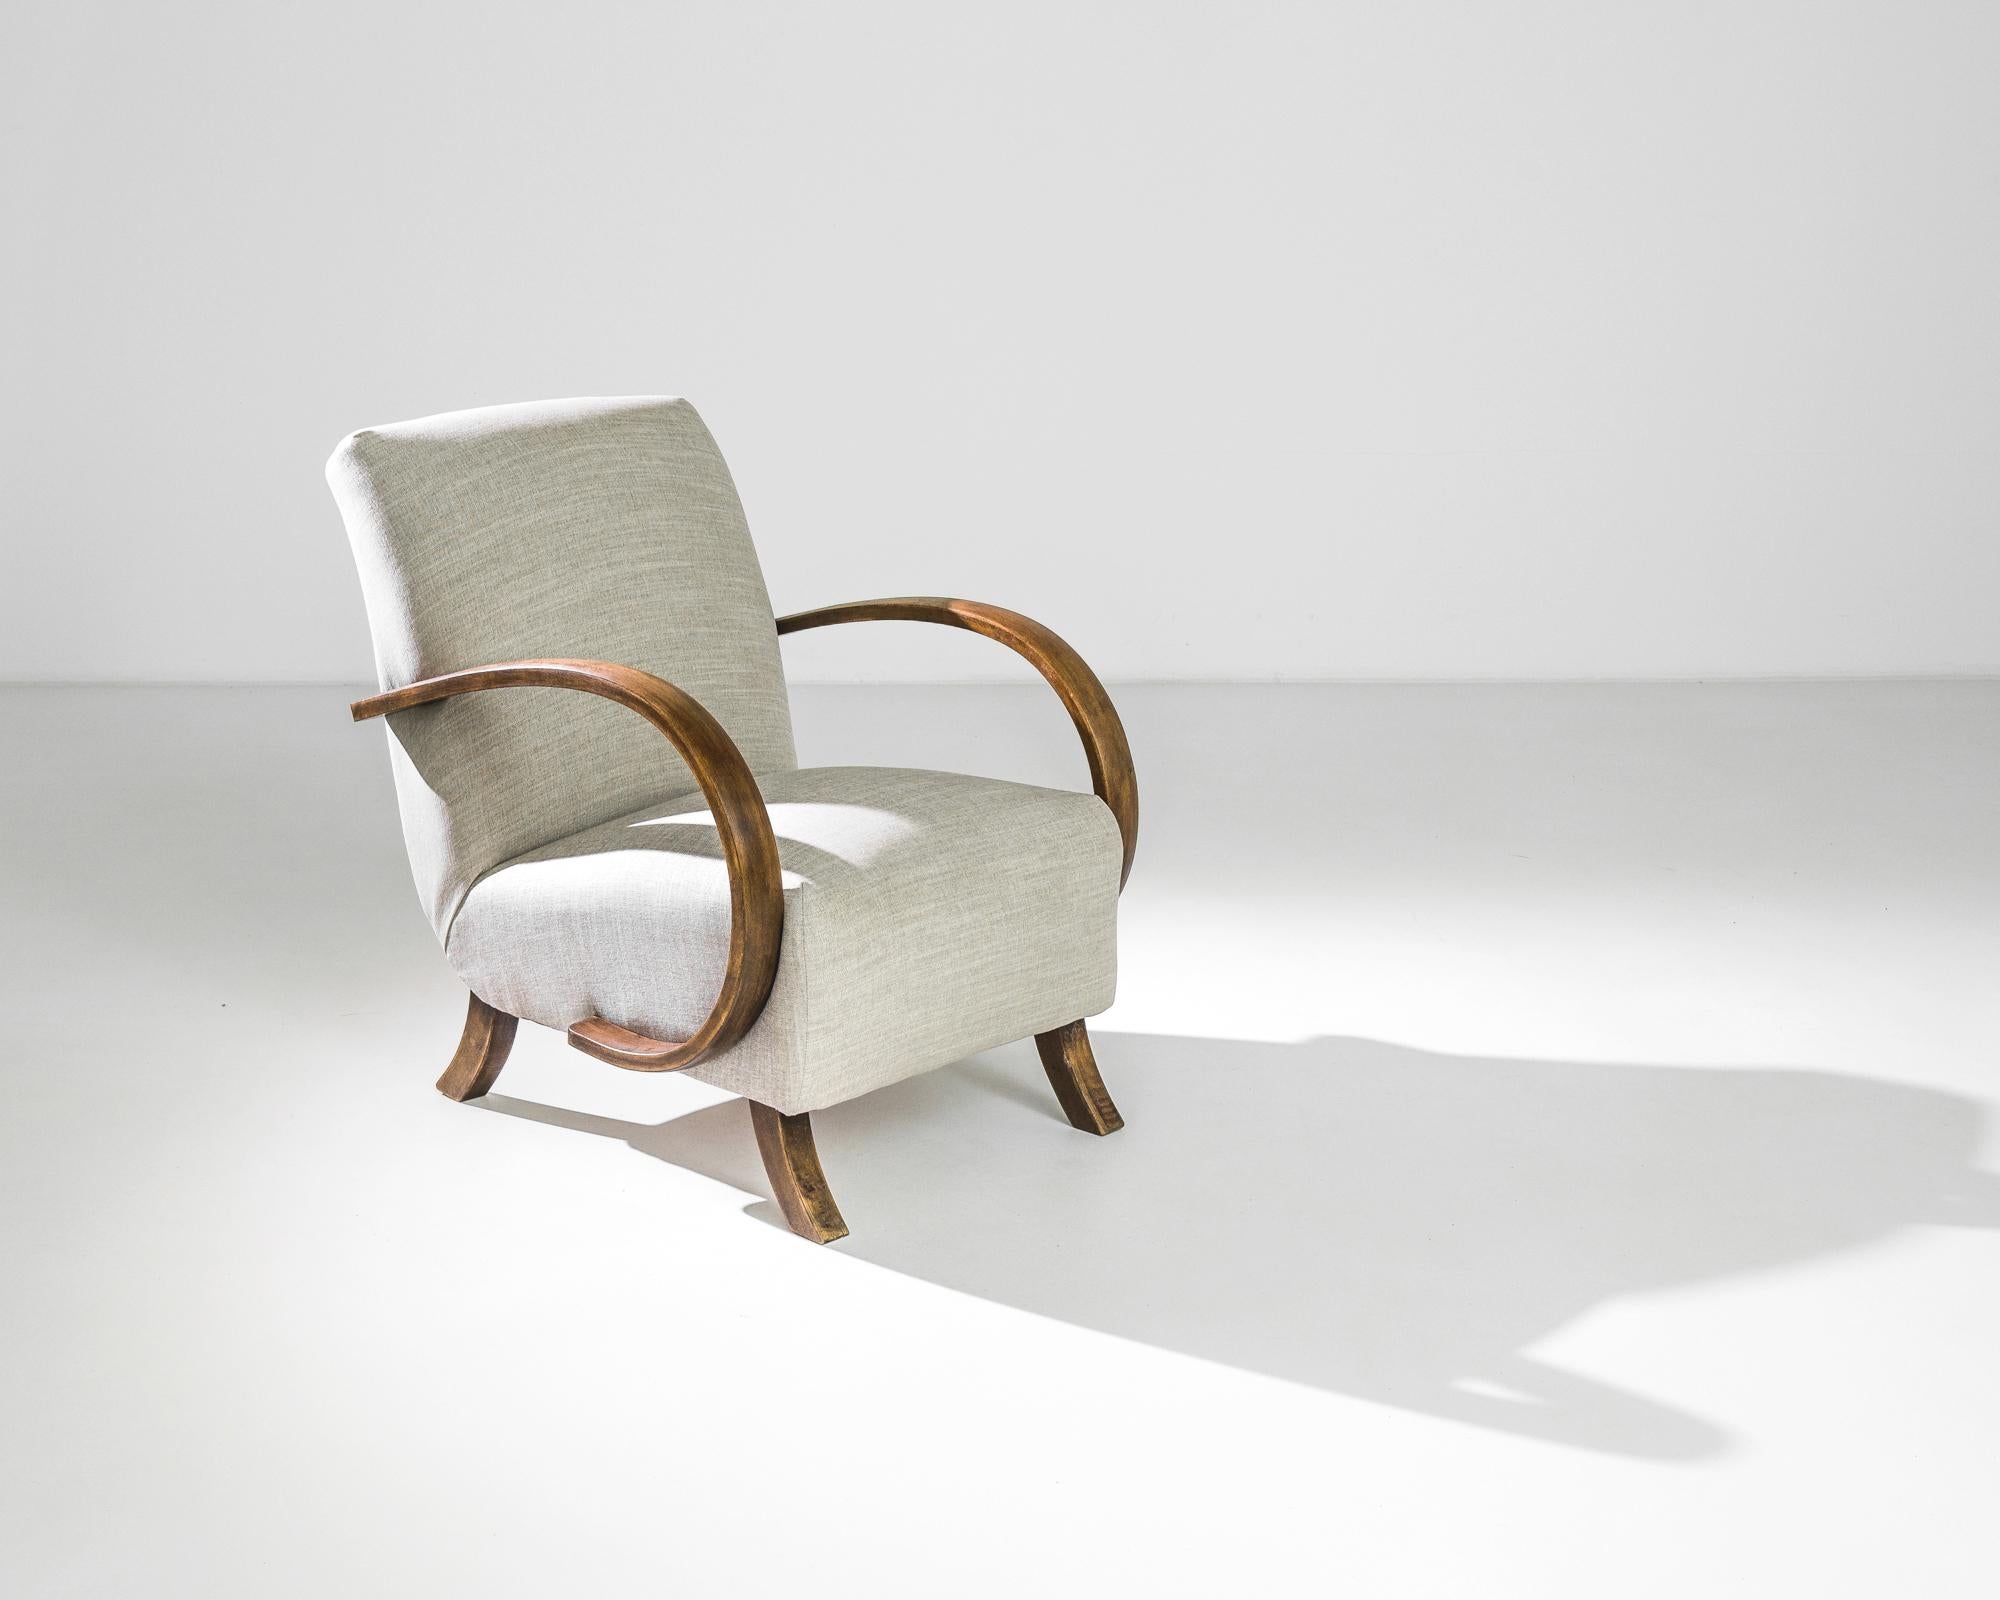 A Modern armchair by Czech furniture designer J. Halabala. Made in the 1930s, the eye-catching silhouette and comfortable design has an enduring appeal. Influenced by Mid-Century Modern and Art Deco design, a deep upholstered seat upon curved wooden